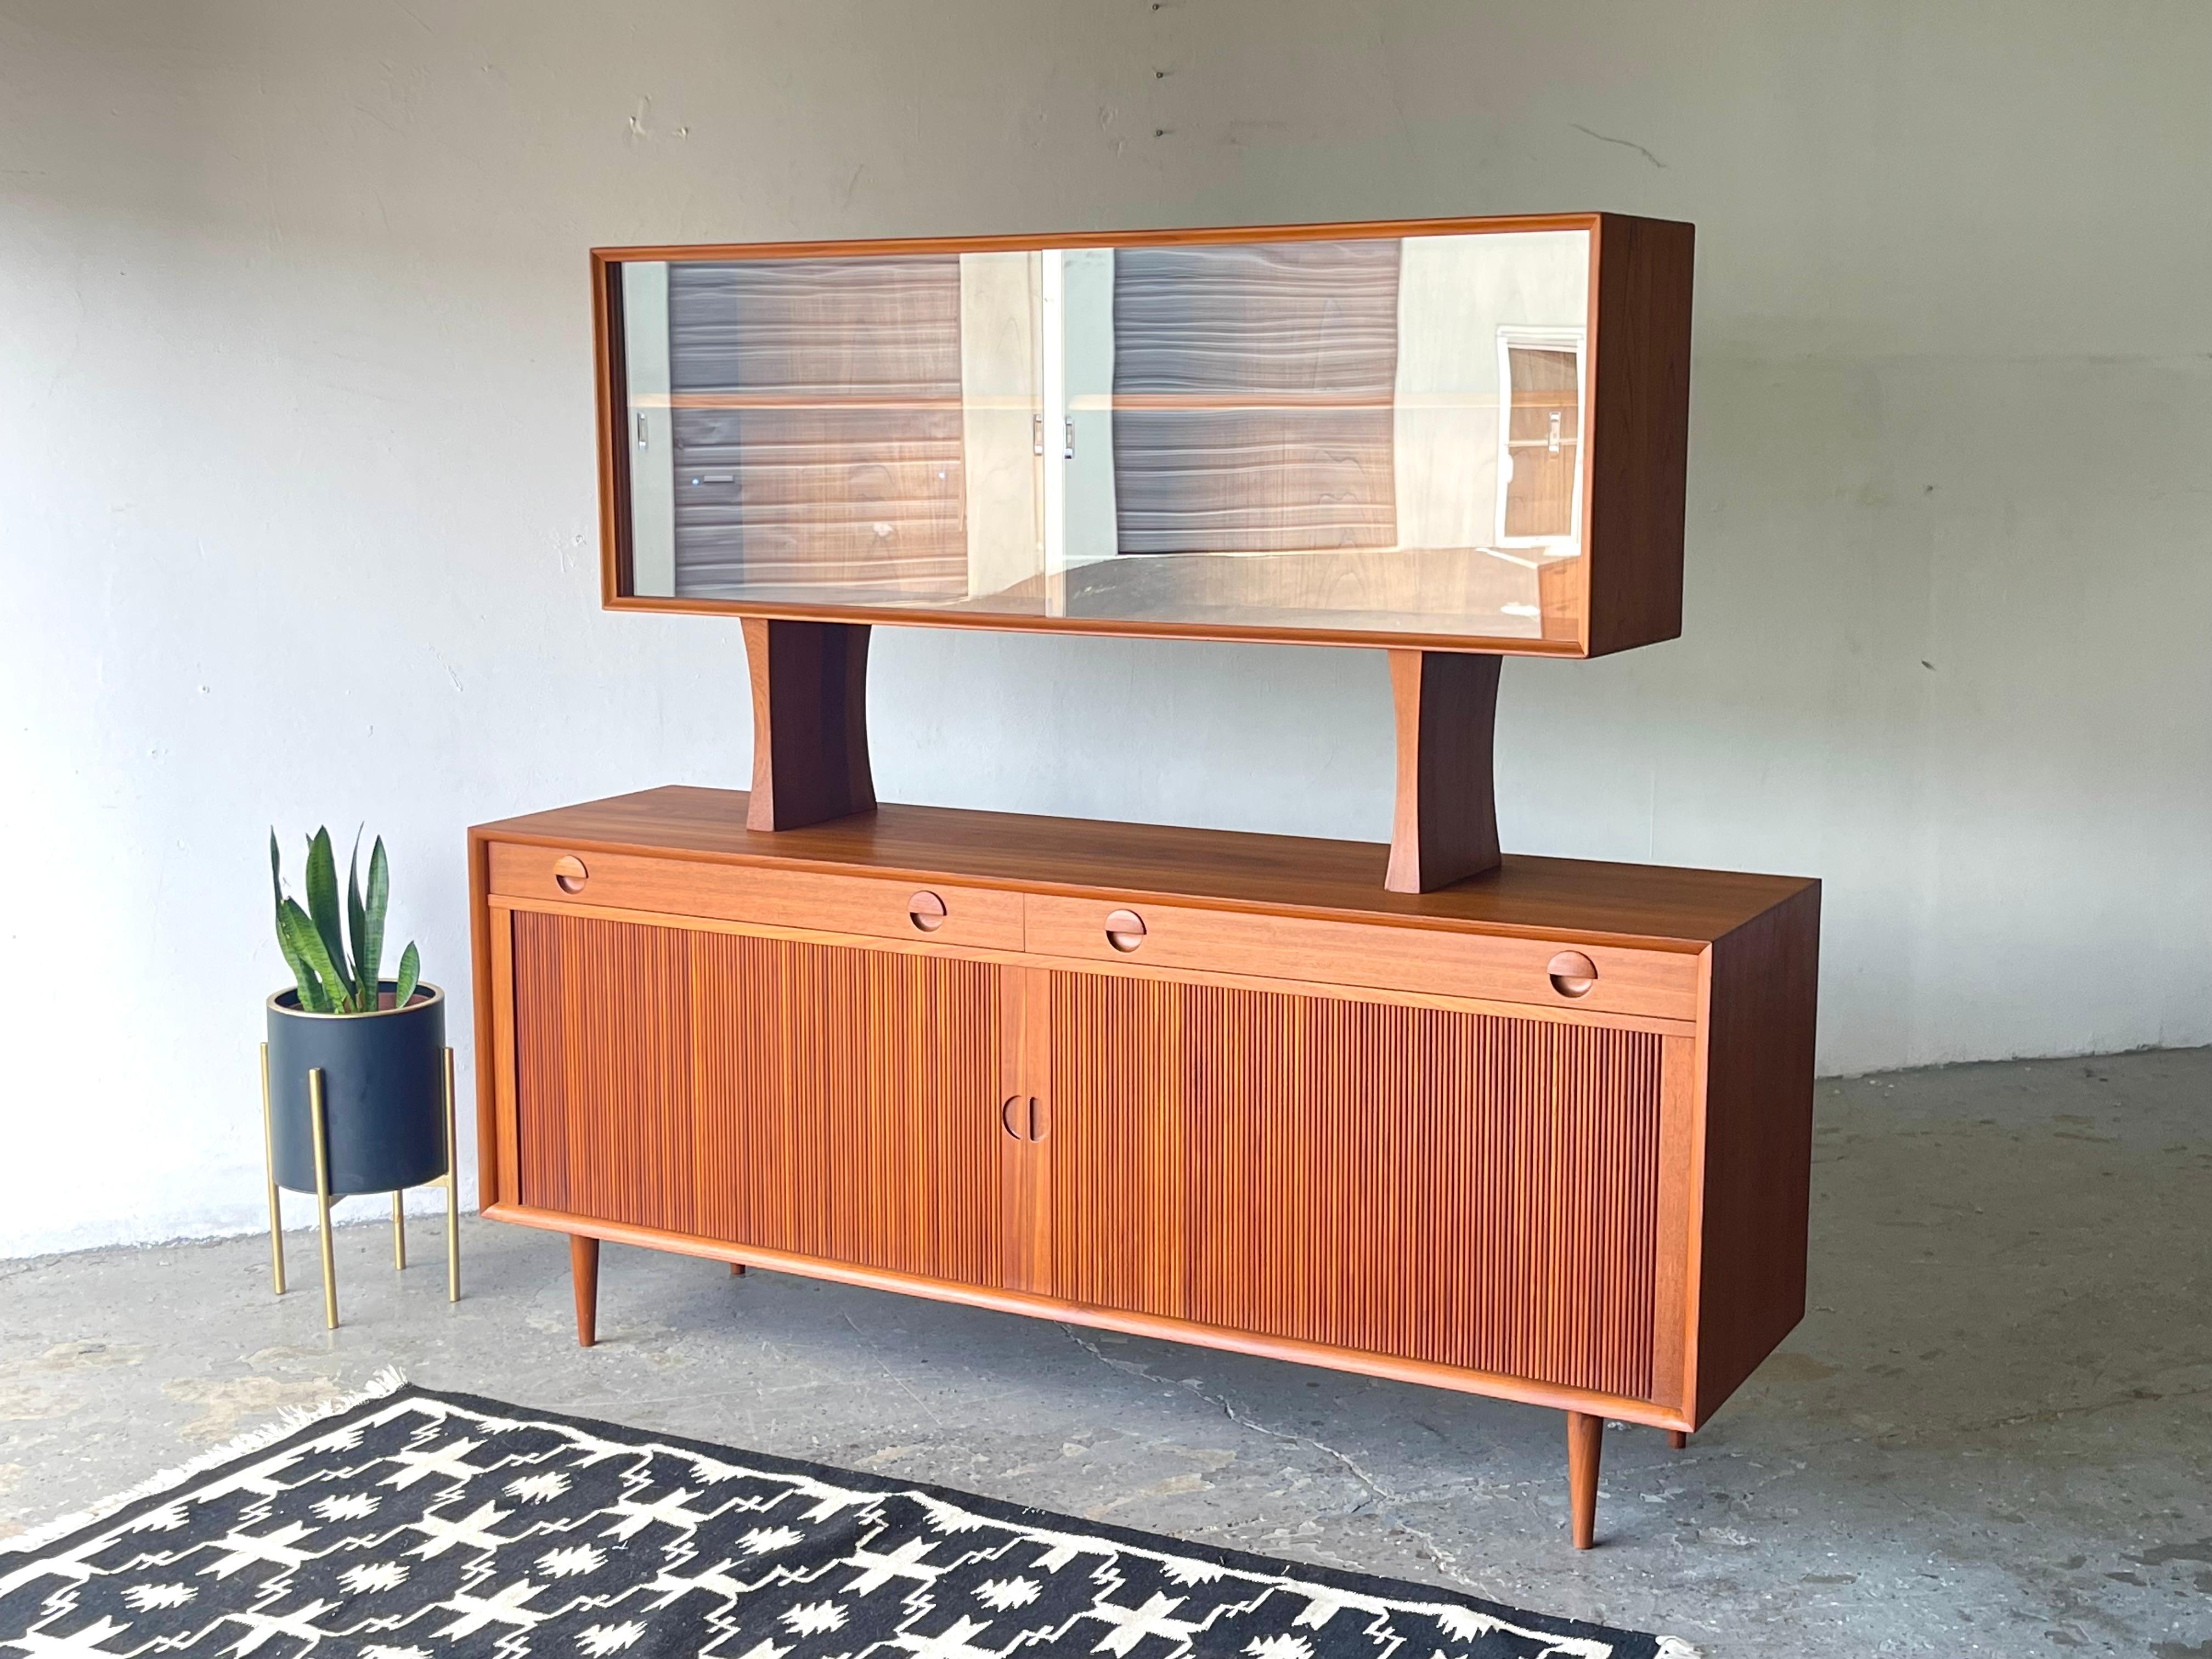 This credenza, known as the 'Model 41', was Originally purchased in 1962. Designed by Grete Jalk, this superb mid-century sideboard / credenza, is an iconic piece, finished in beautiful, book-matched, teak veneers, features two narrow drawers (each